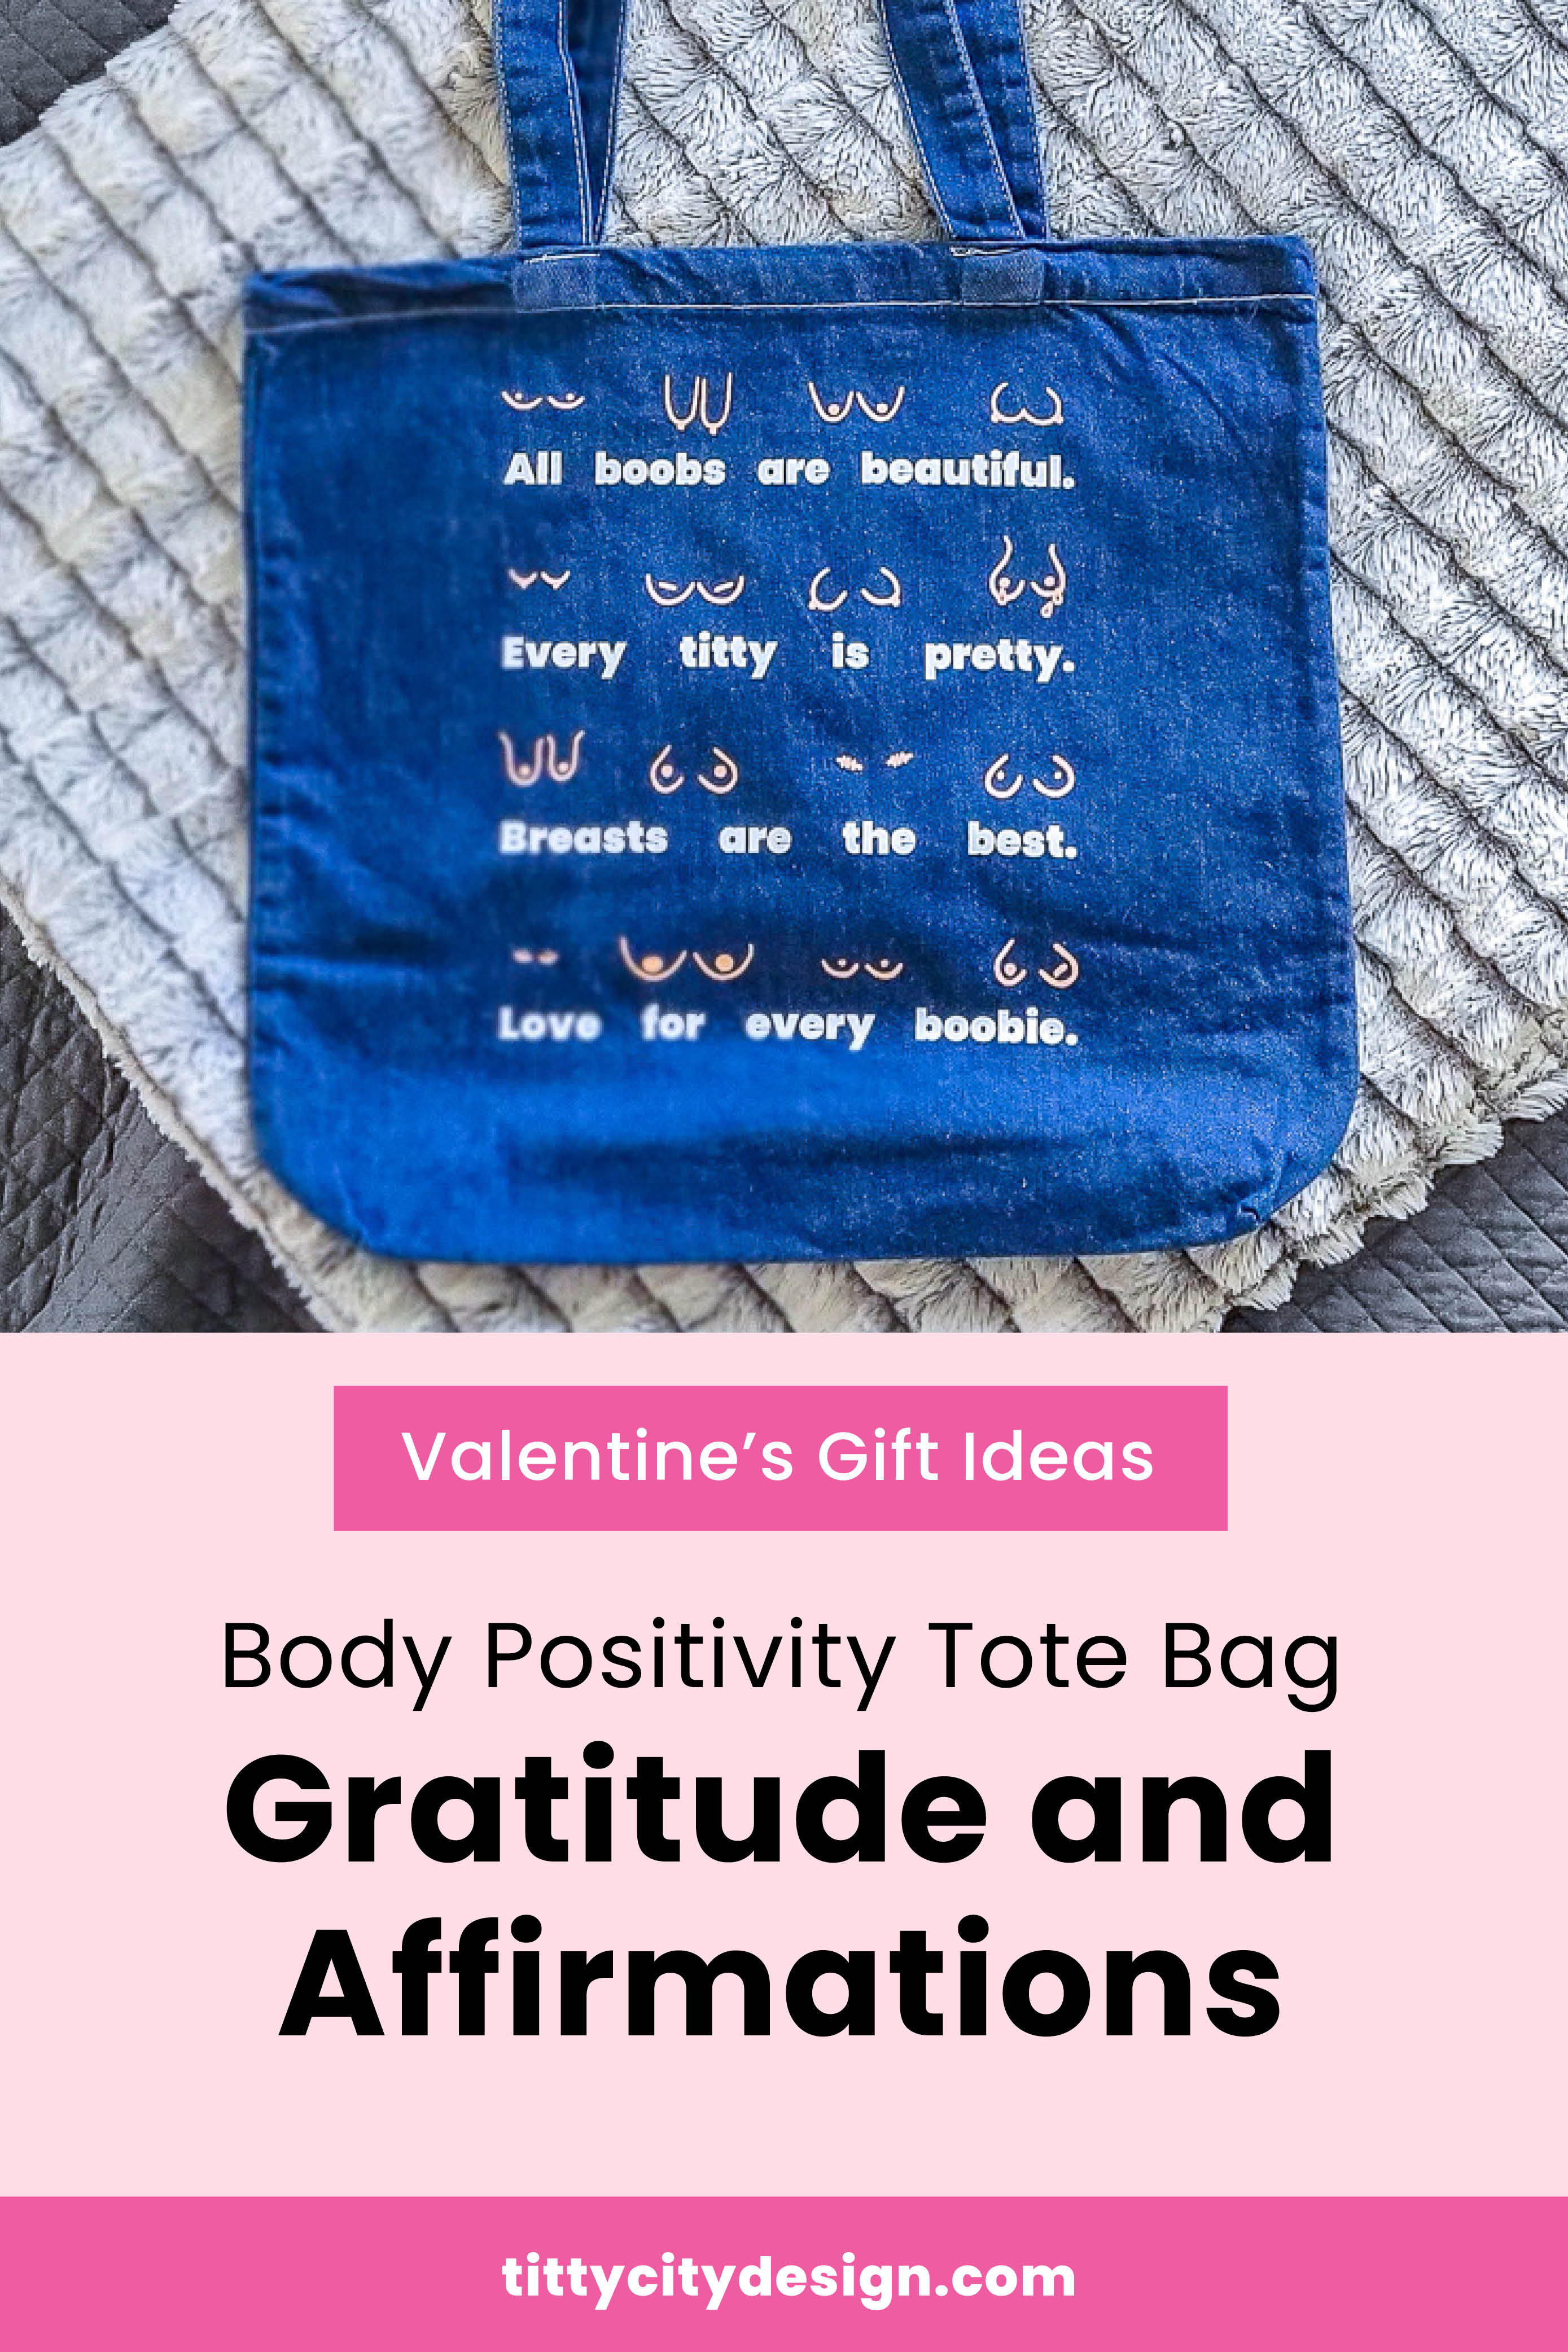 Valentines Gift Ideas - Denim Empowering Body Positive Boob Tote Bag "Gratitude and Affirmations"